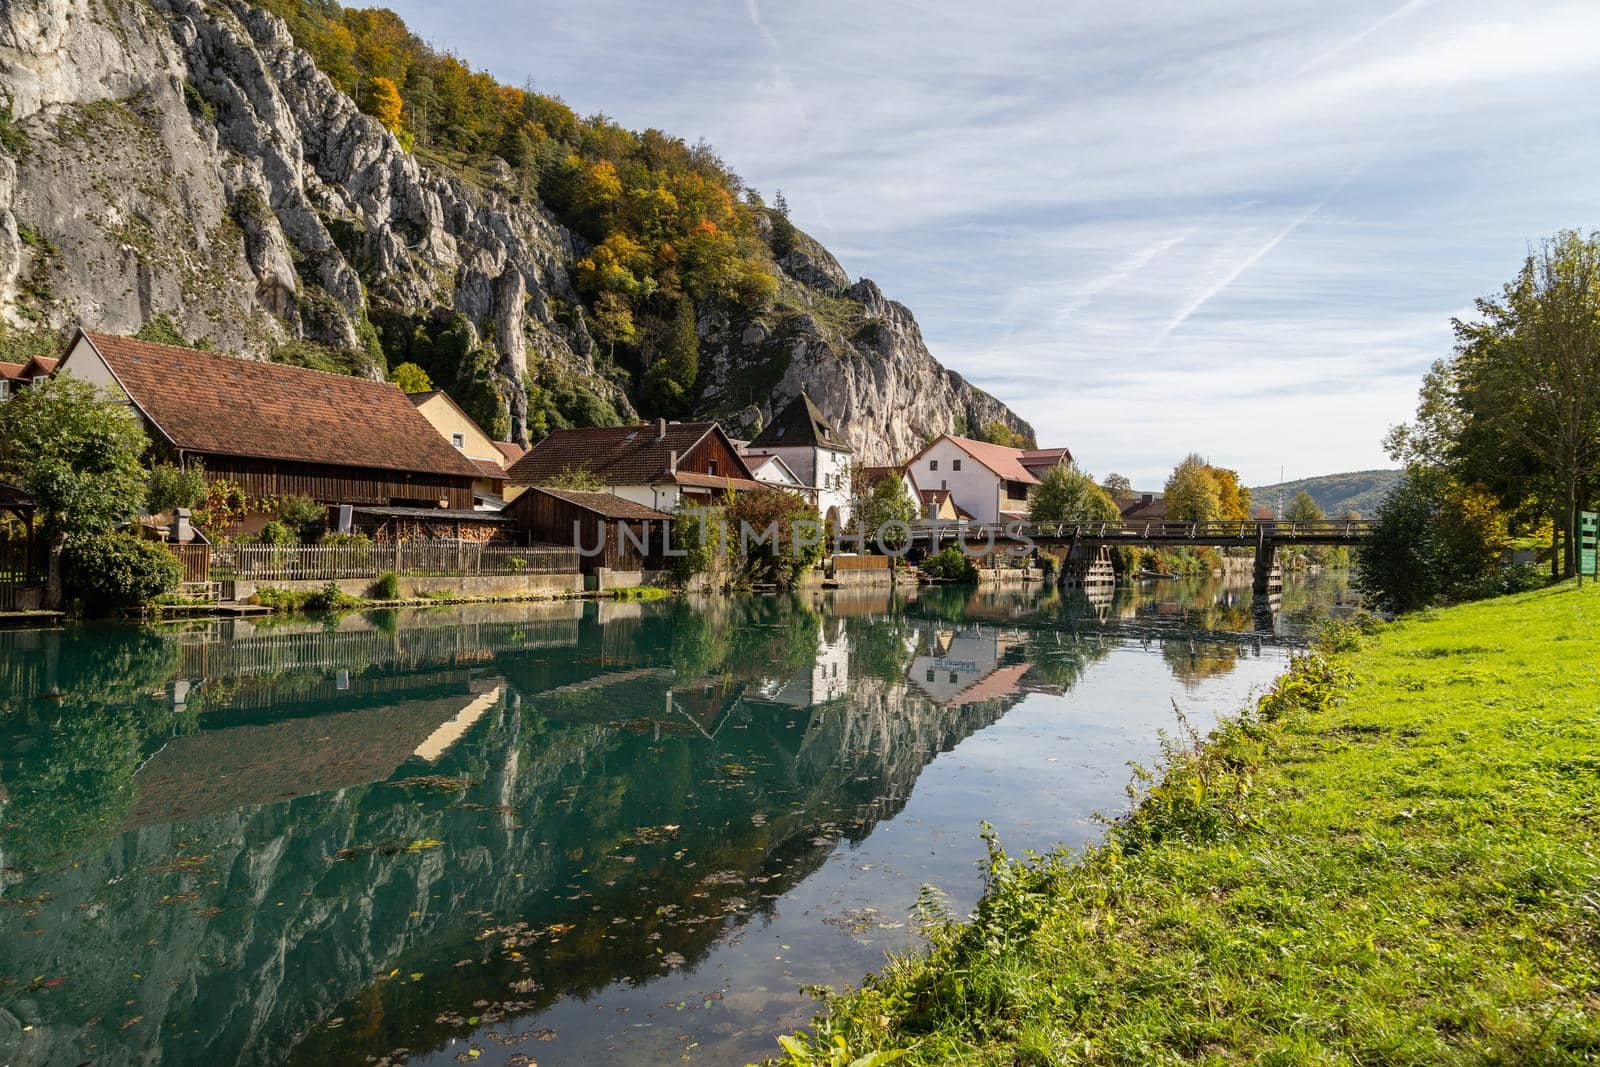 Idyllic view at the village Markt Essing in Bavaria, Germany with the Altmuehl river and high rocks  by reinerc